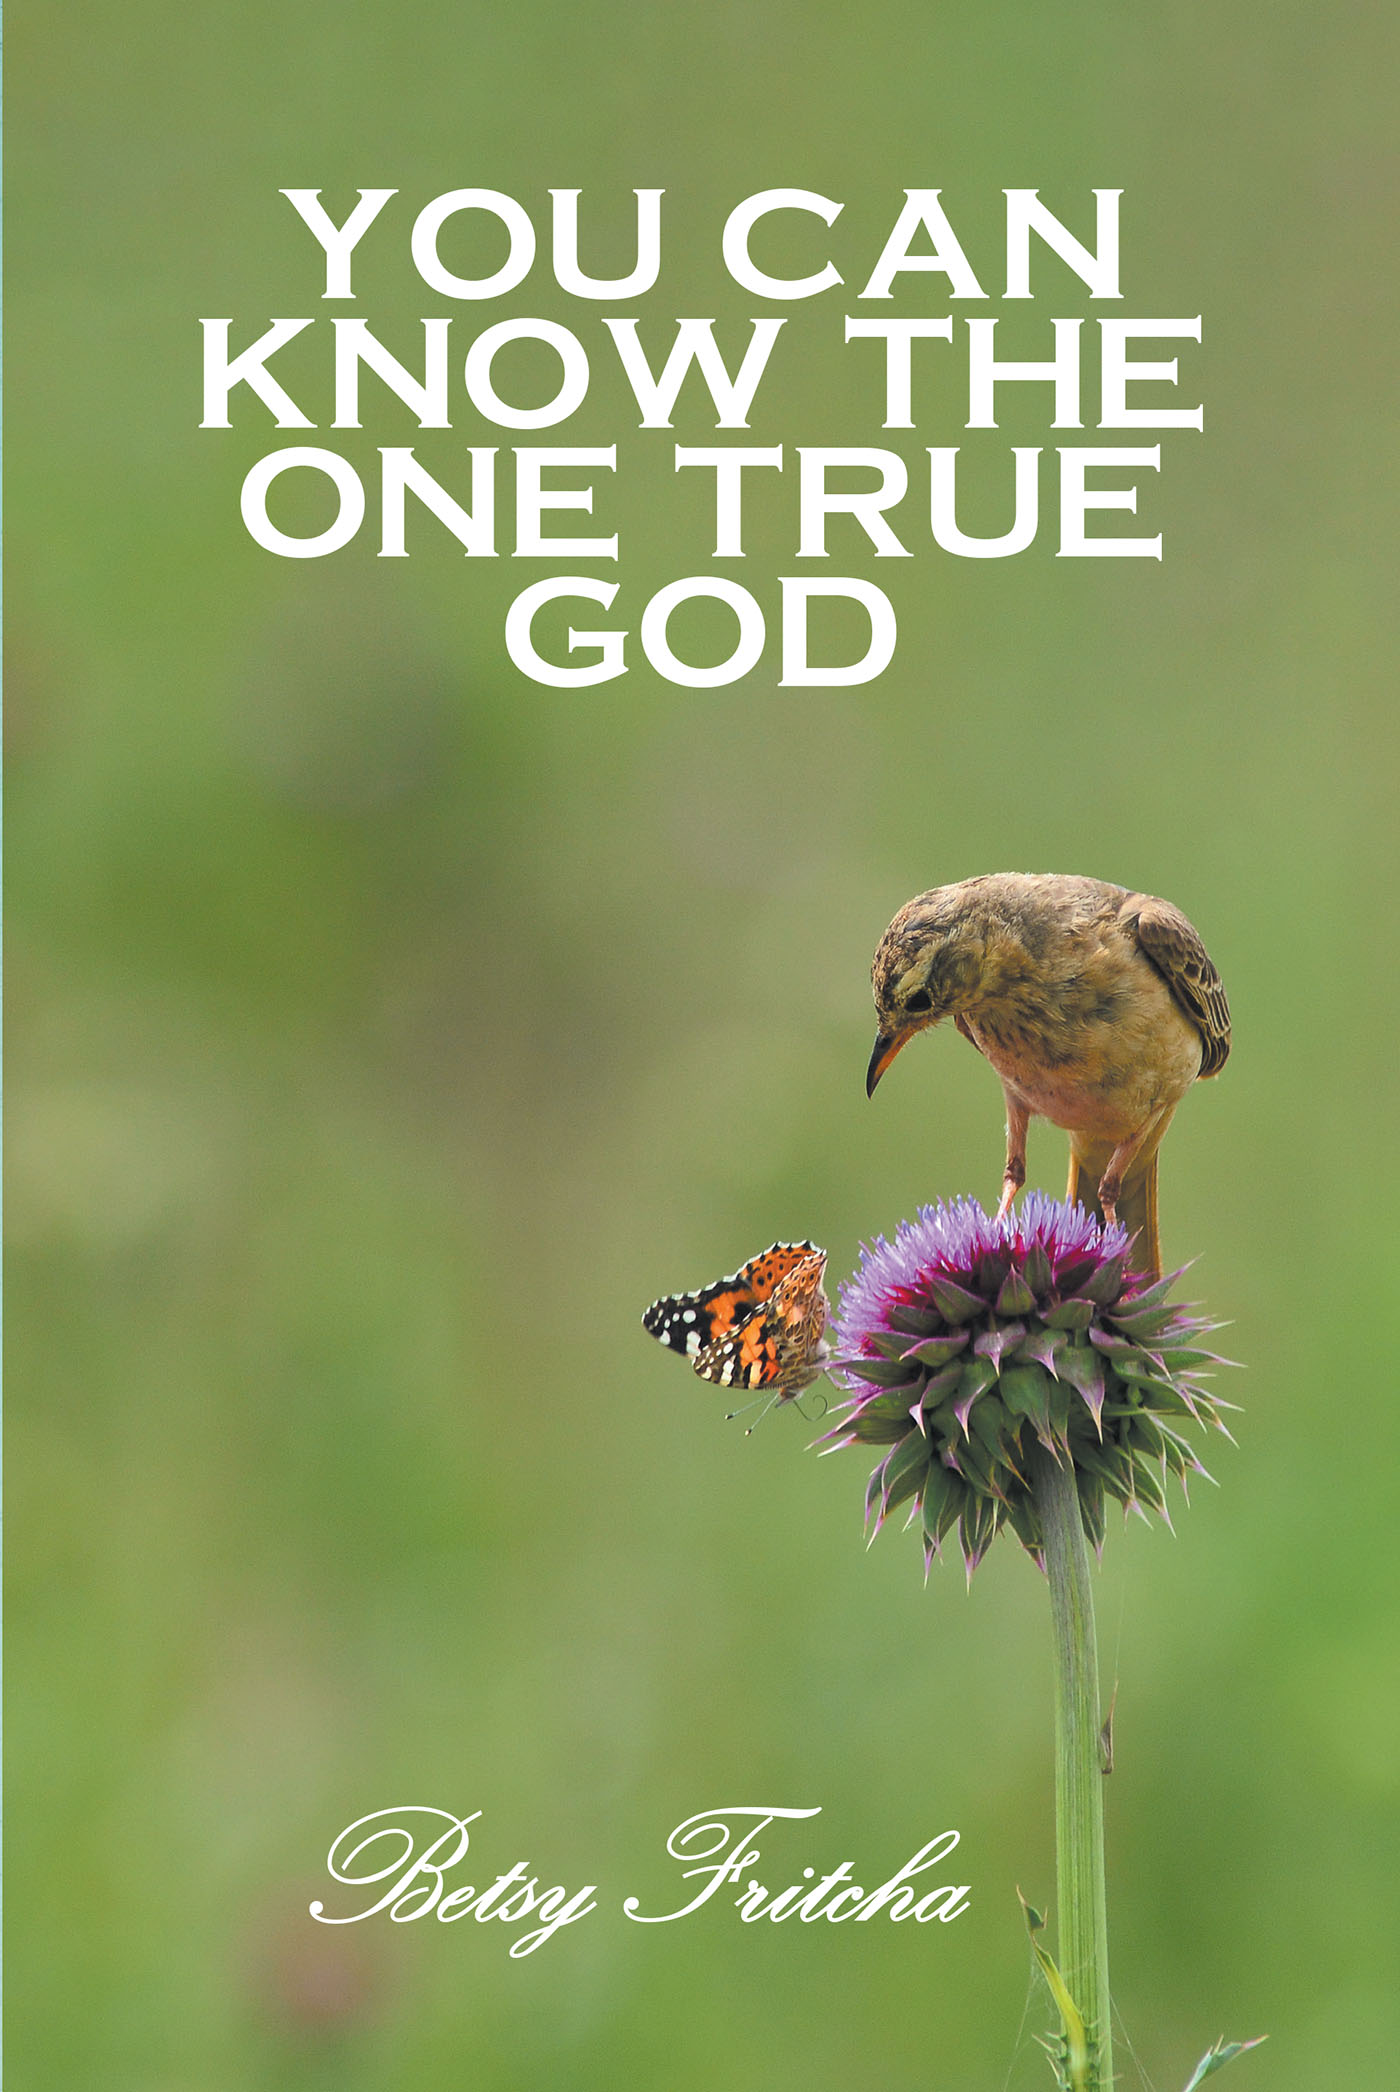 Betsy Fritcha’s Newly Released "You Can Know the One True God" is an Interactive Learning Experience That Encourages Active Use of the Bible